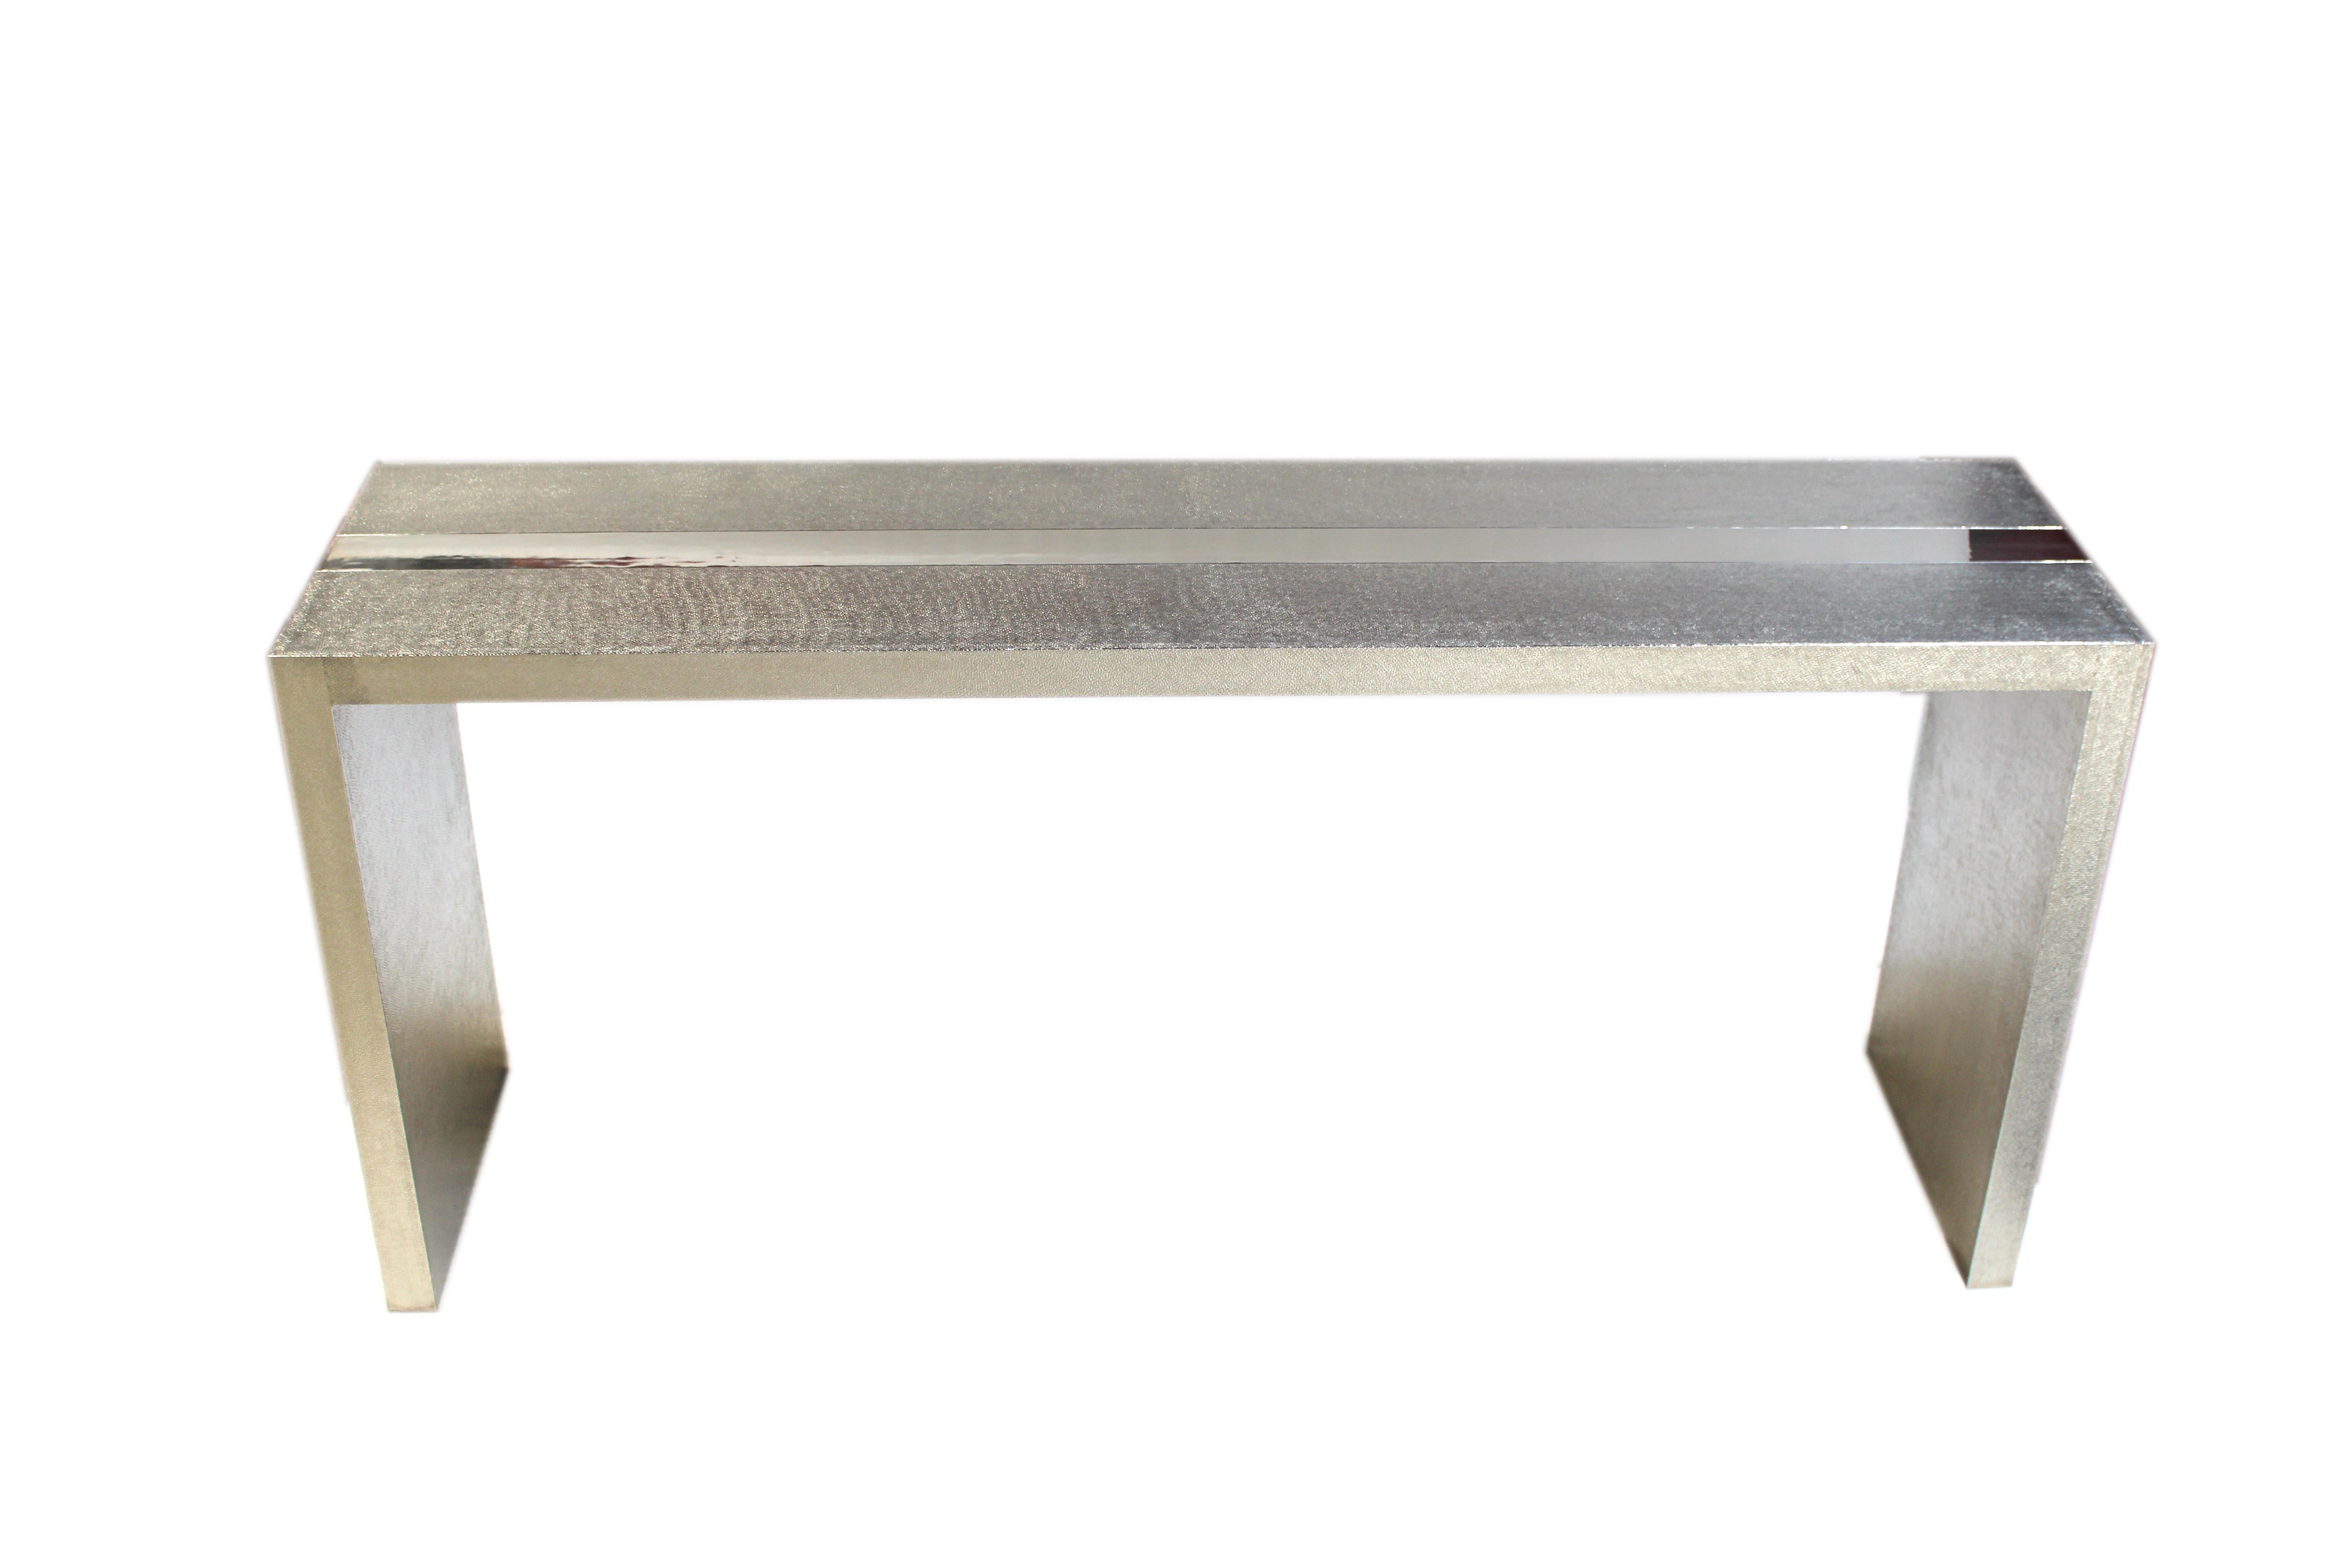 Art Deco Rectangular Console Tables Mid. Hammered Antique Bronze by Alison Spear For Sale 7